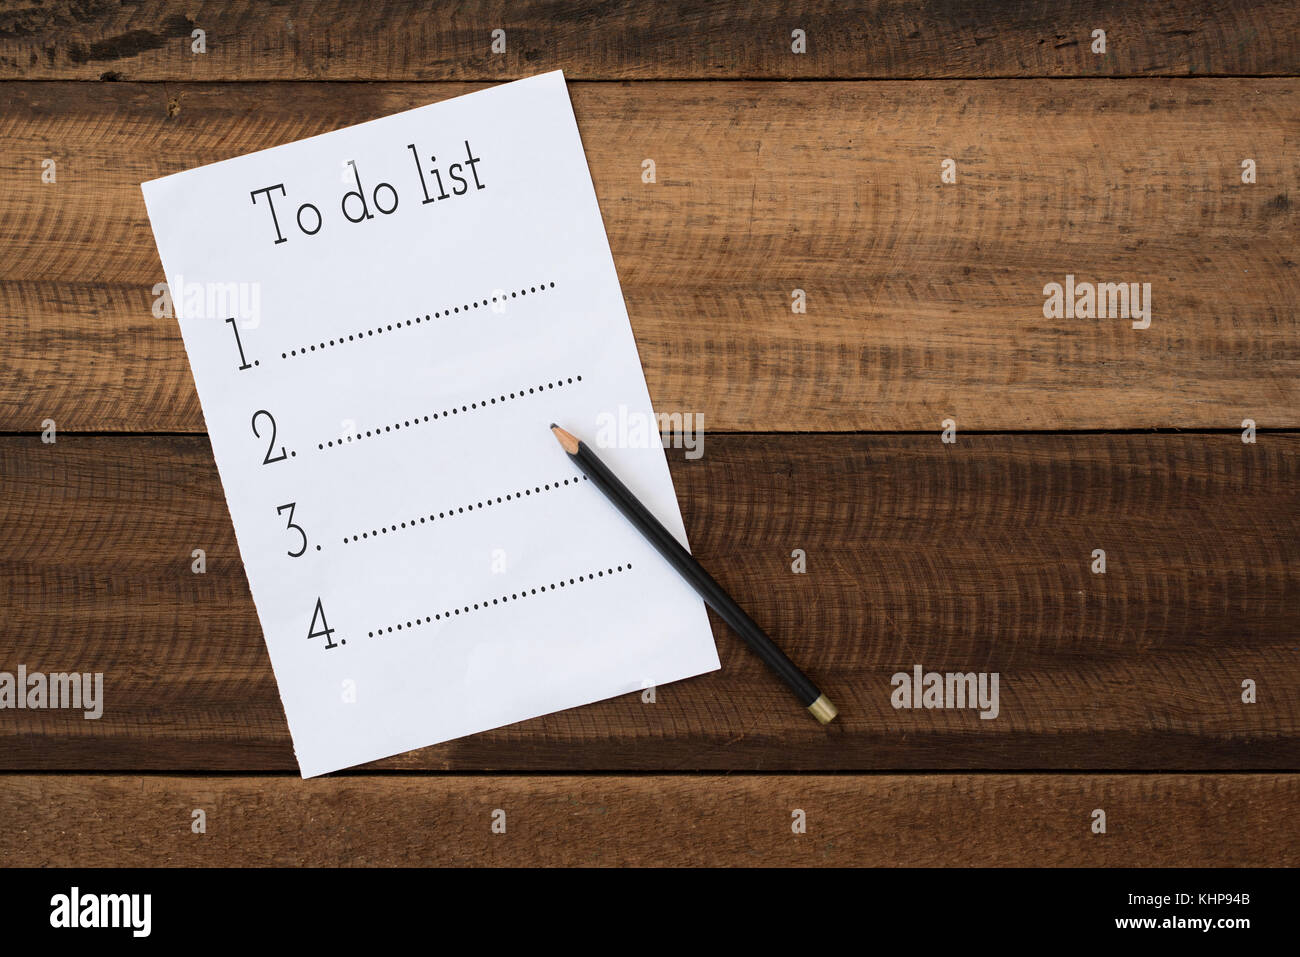 empty to do list with pencil on wooden table.lifestyle concept Stock Photo